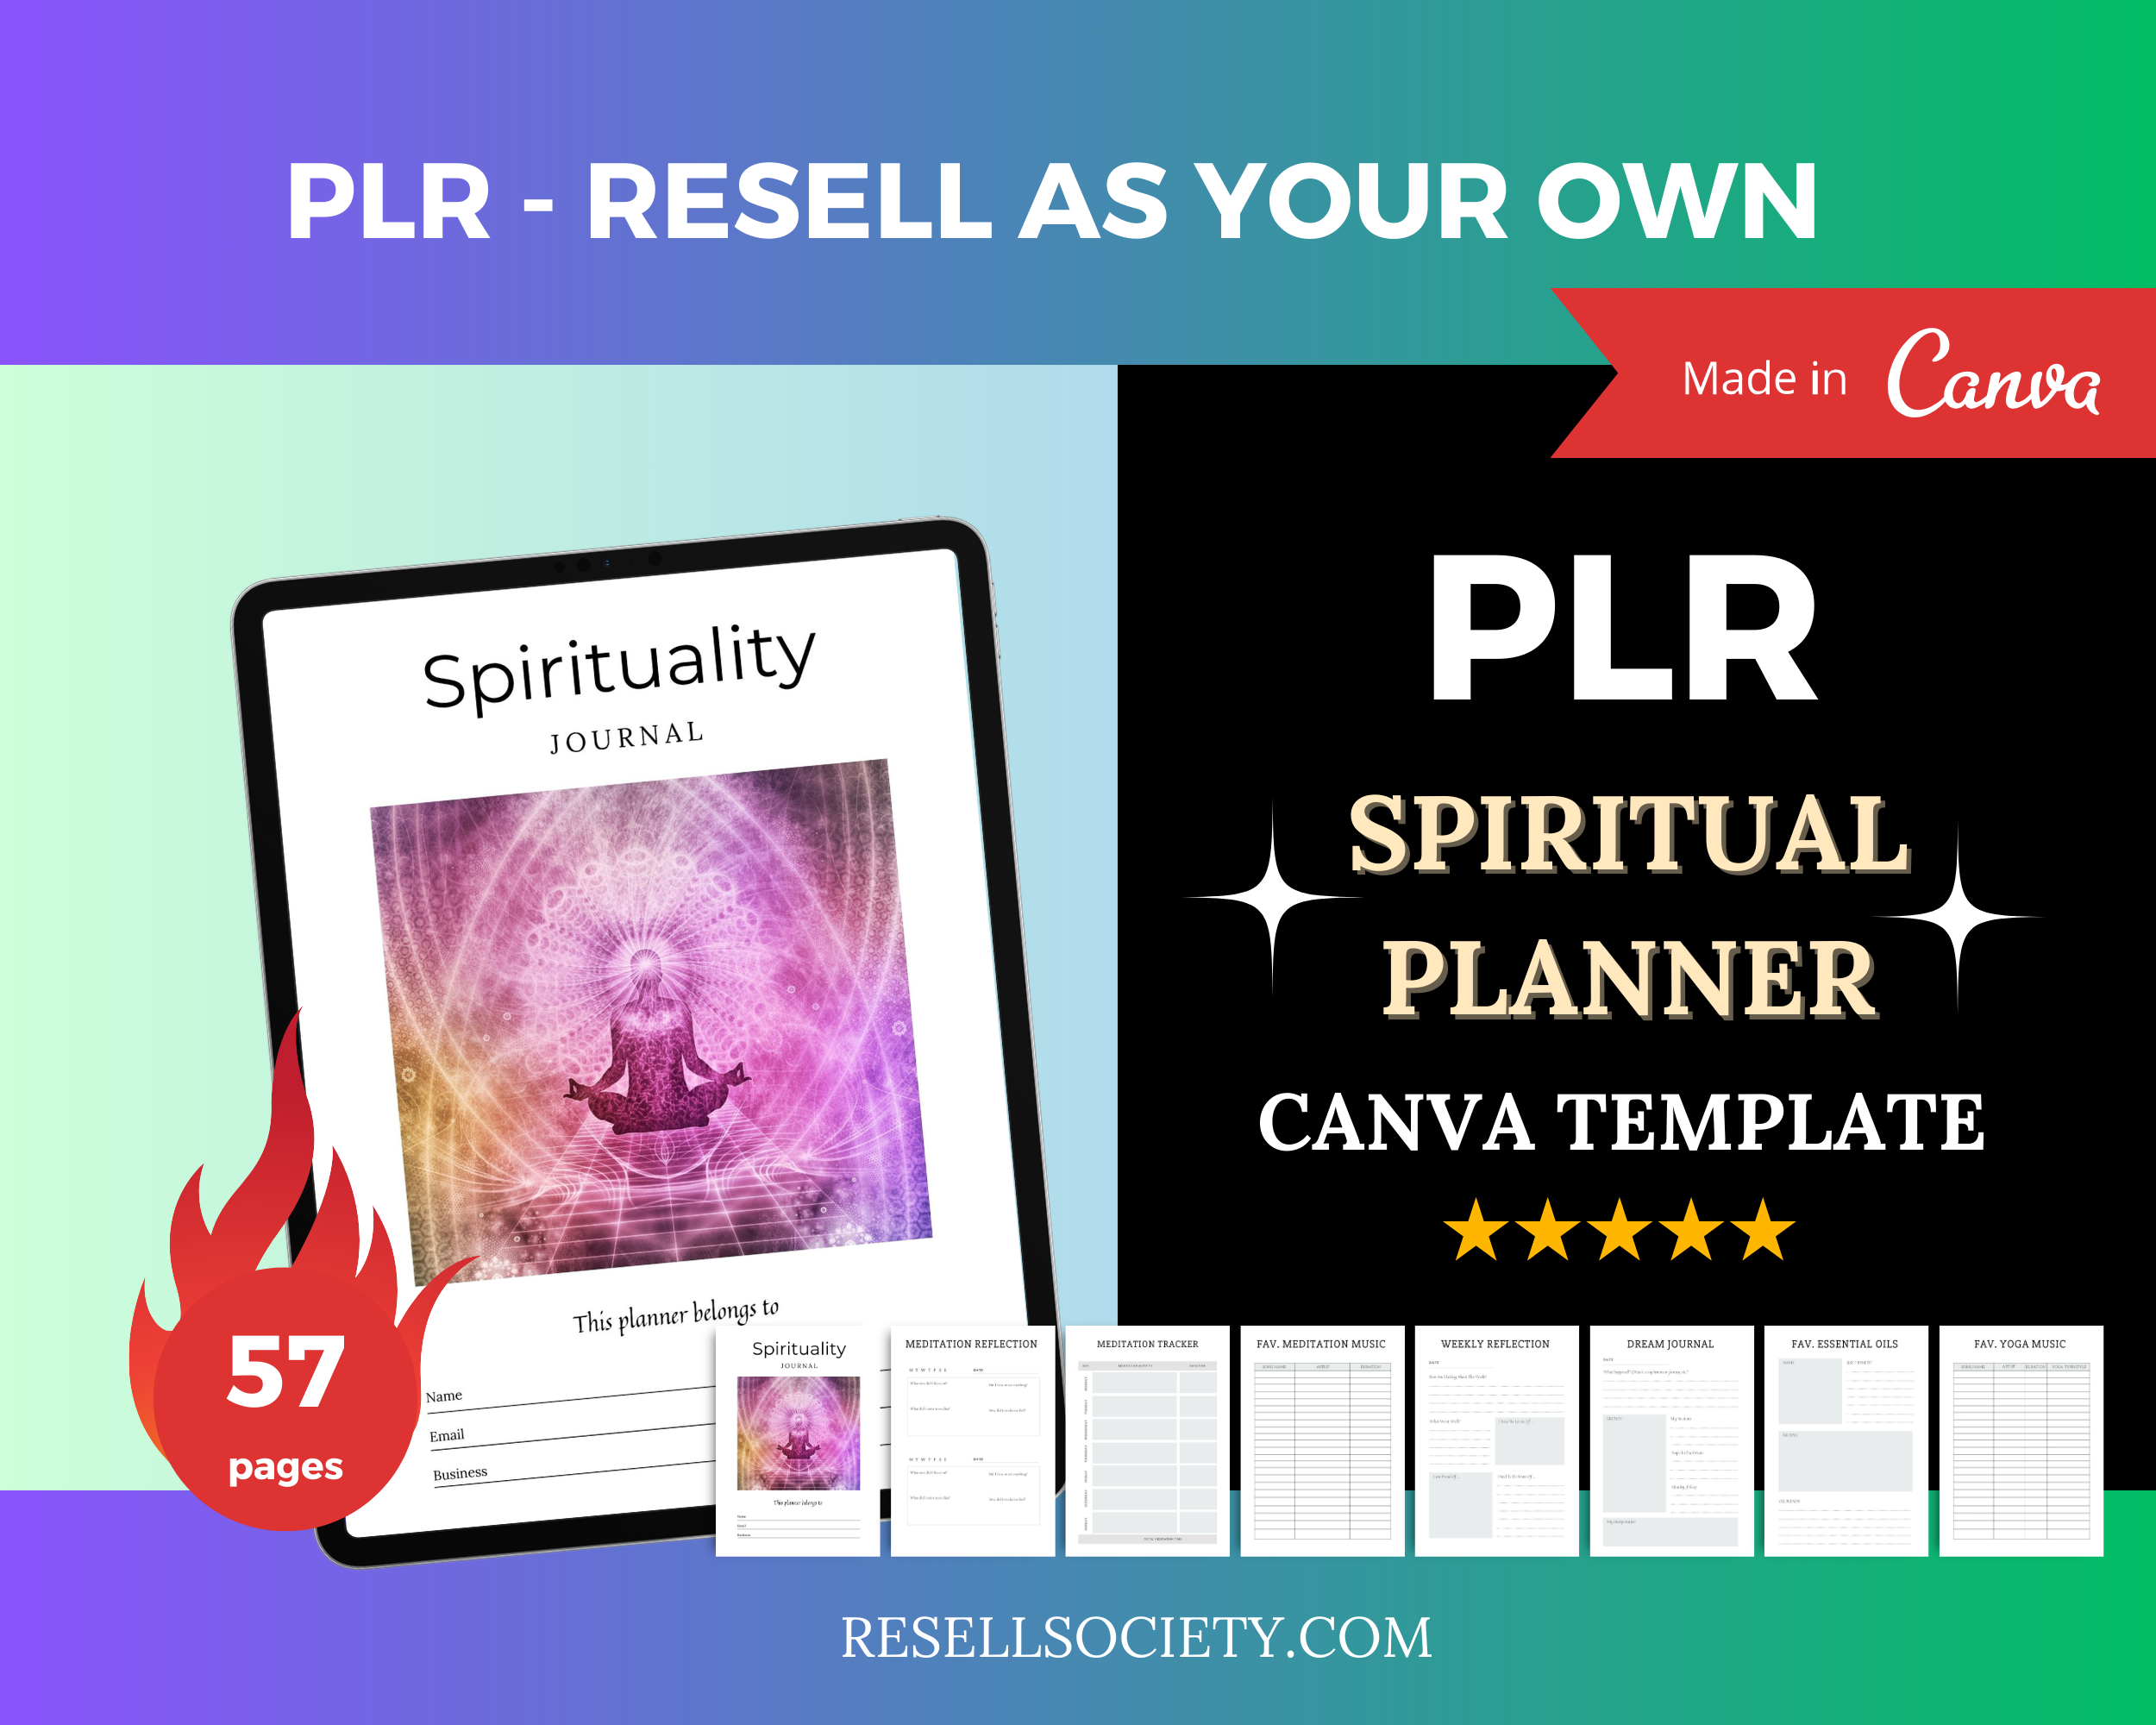 Editable Spirituality Journal in Canva | Commercial Use